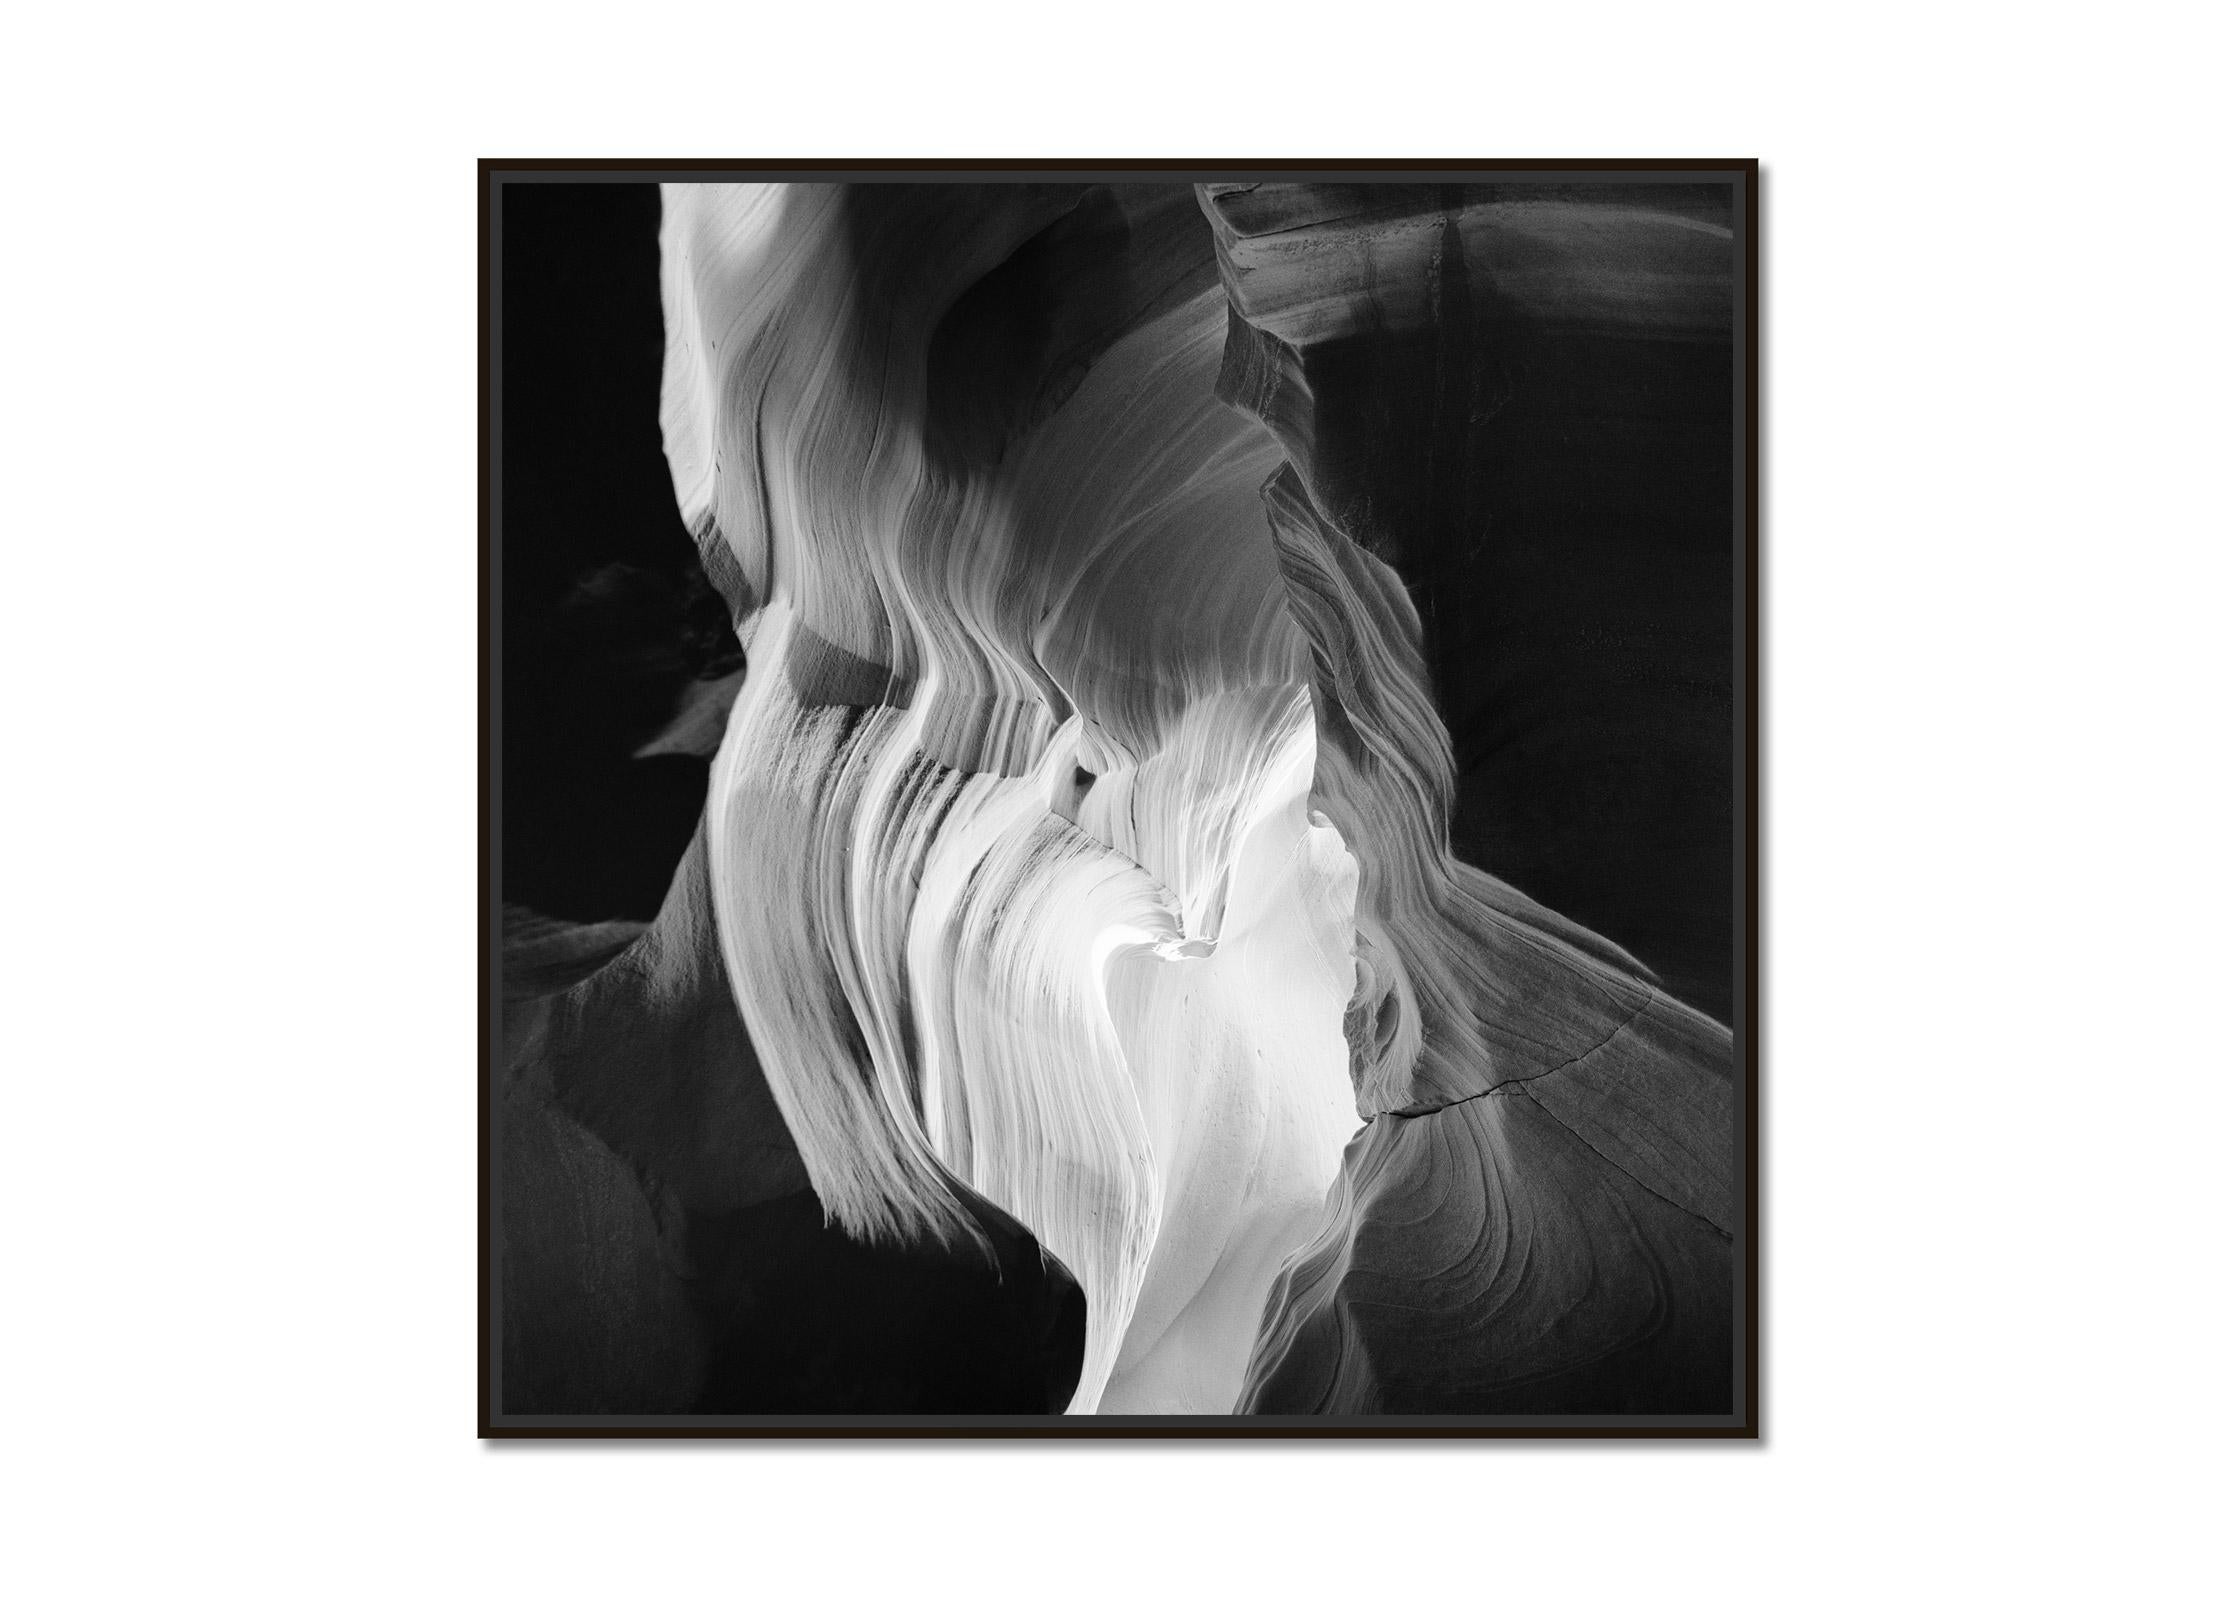 Heart, Antelope Canyon, Arizona, USA, black and white photography, landscape - Photograph by Gerald Berghammer, Ina Forstinger